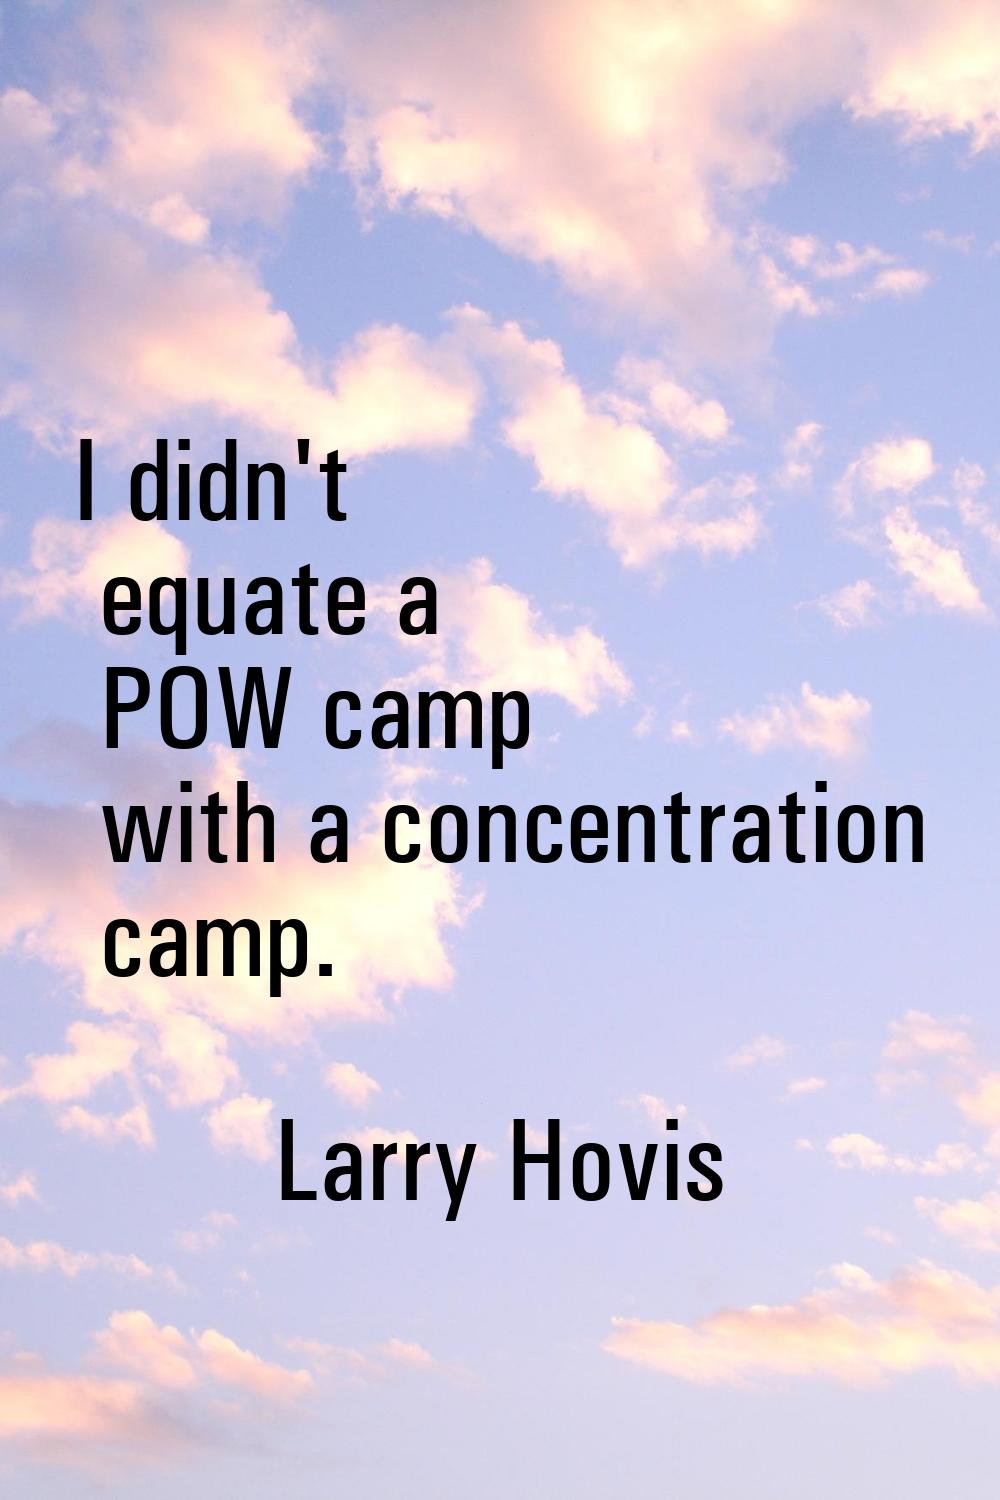 I didn't equate a POW camp with a concentration camp.